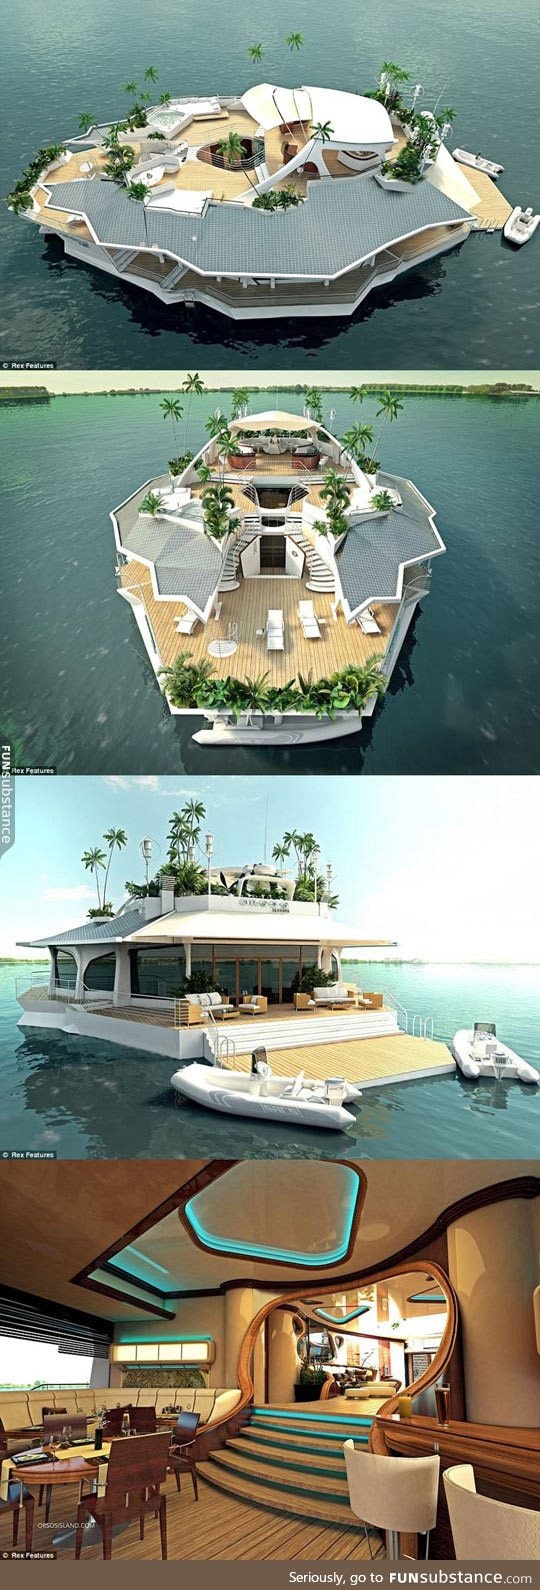 Magnificent floating island boat